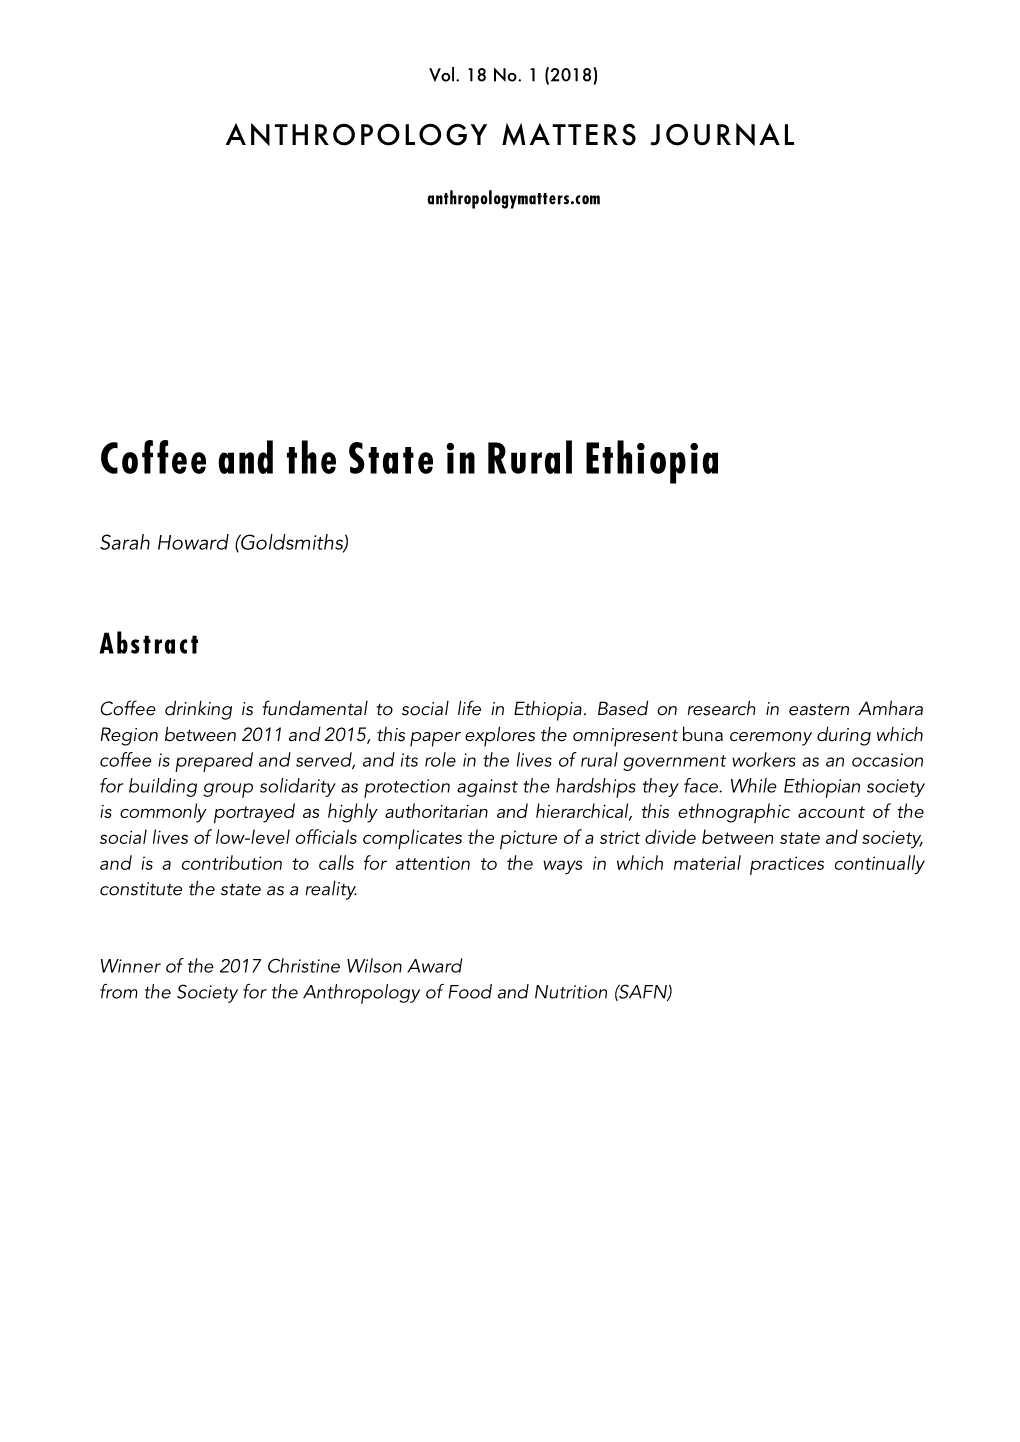 Coffee and the State in Rural Ethiopia